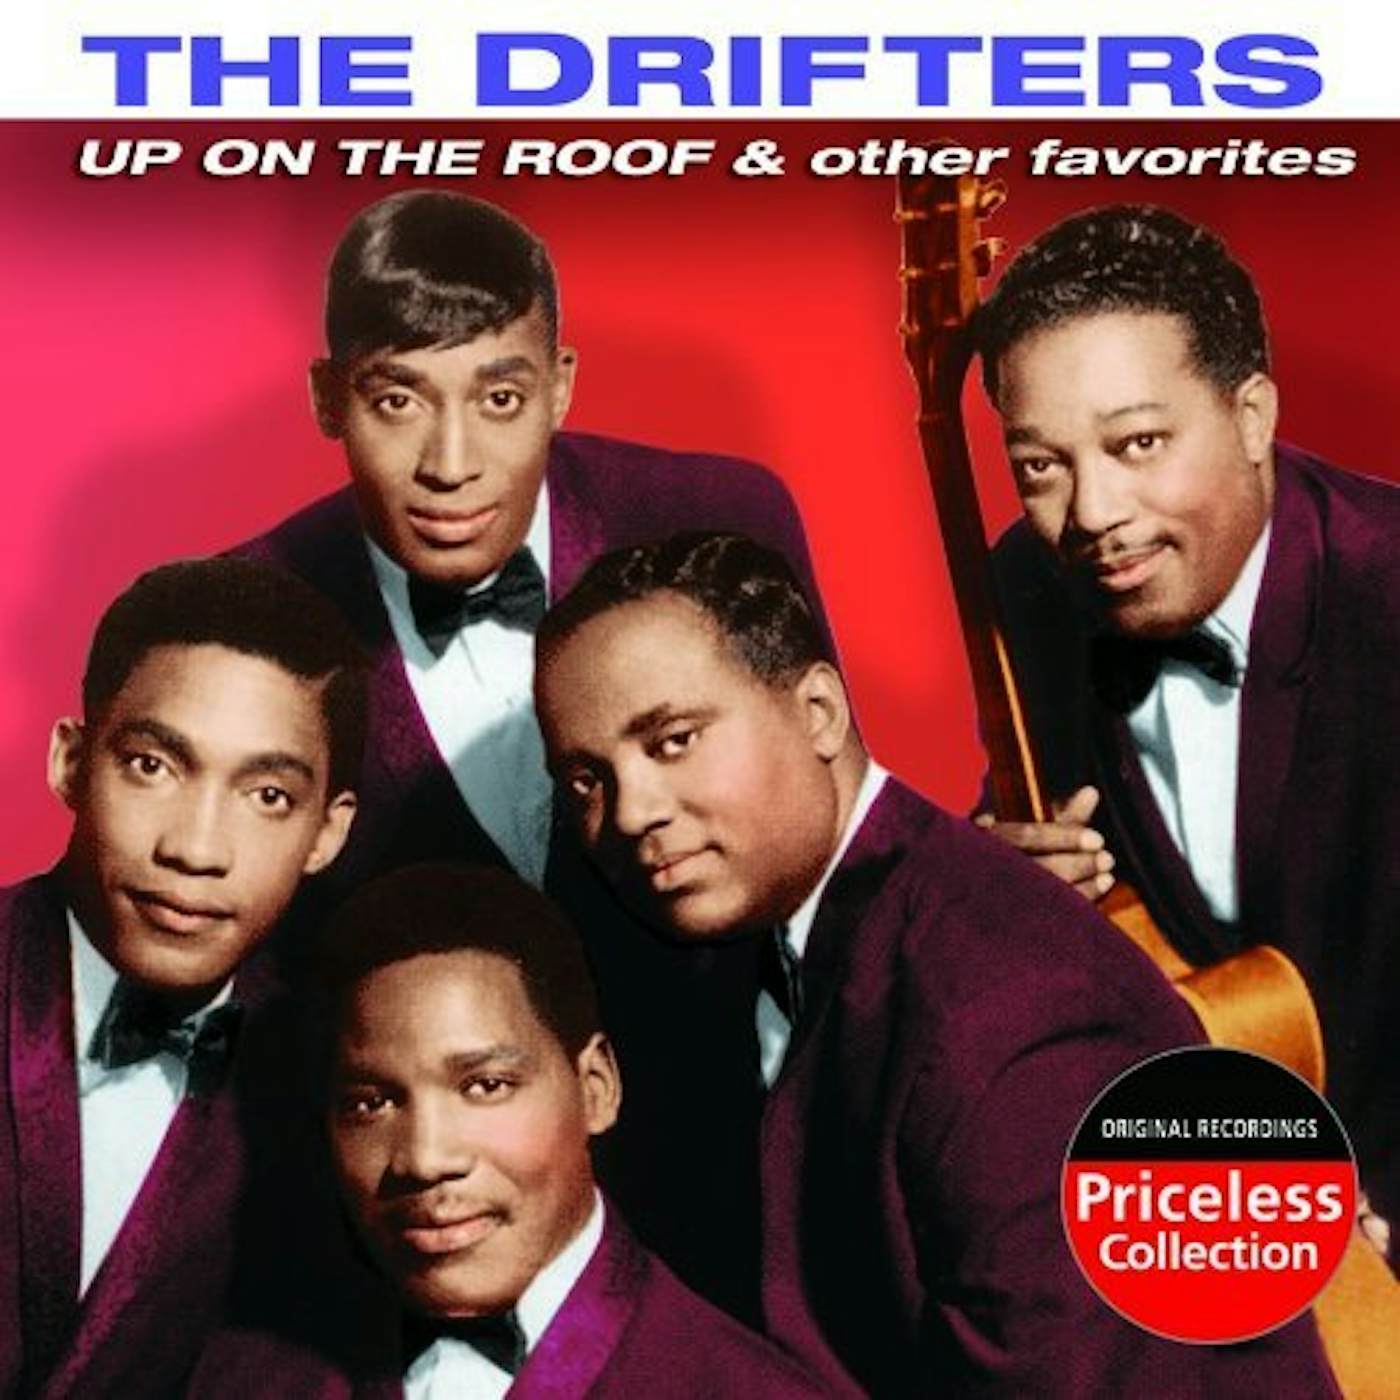 The Drifters UP ON THE ROOF & OTHER FAVORITES CD